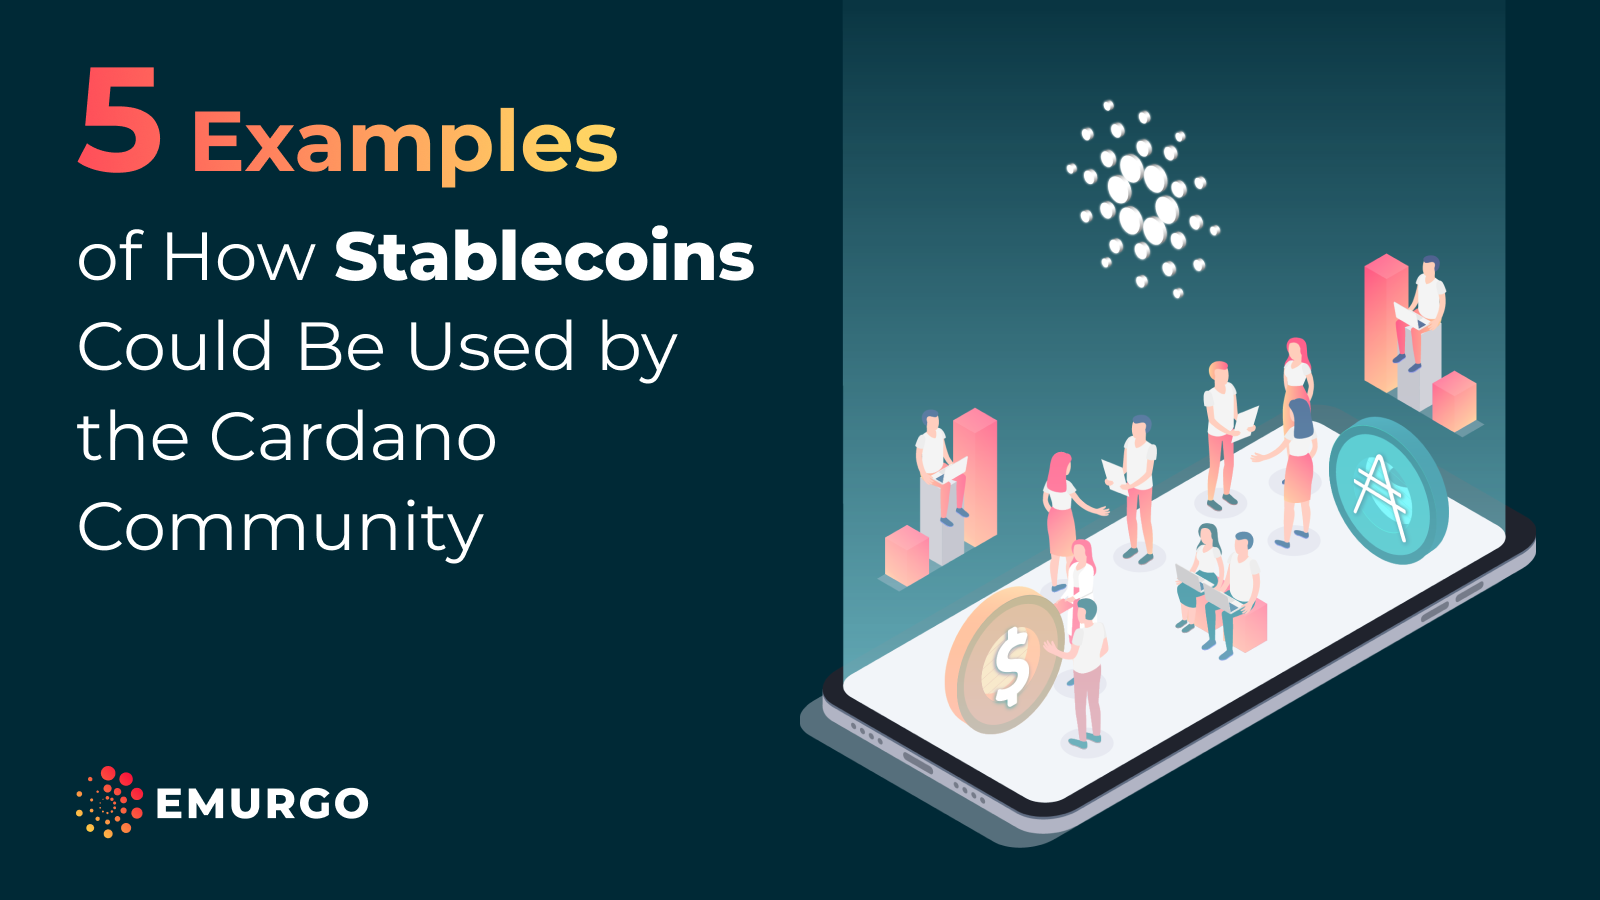 5-Examples-of-How-Stablecoins-Could-Be-Used-By-The-Cardano-Community.png